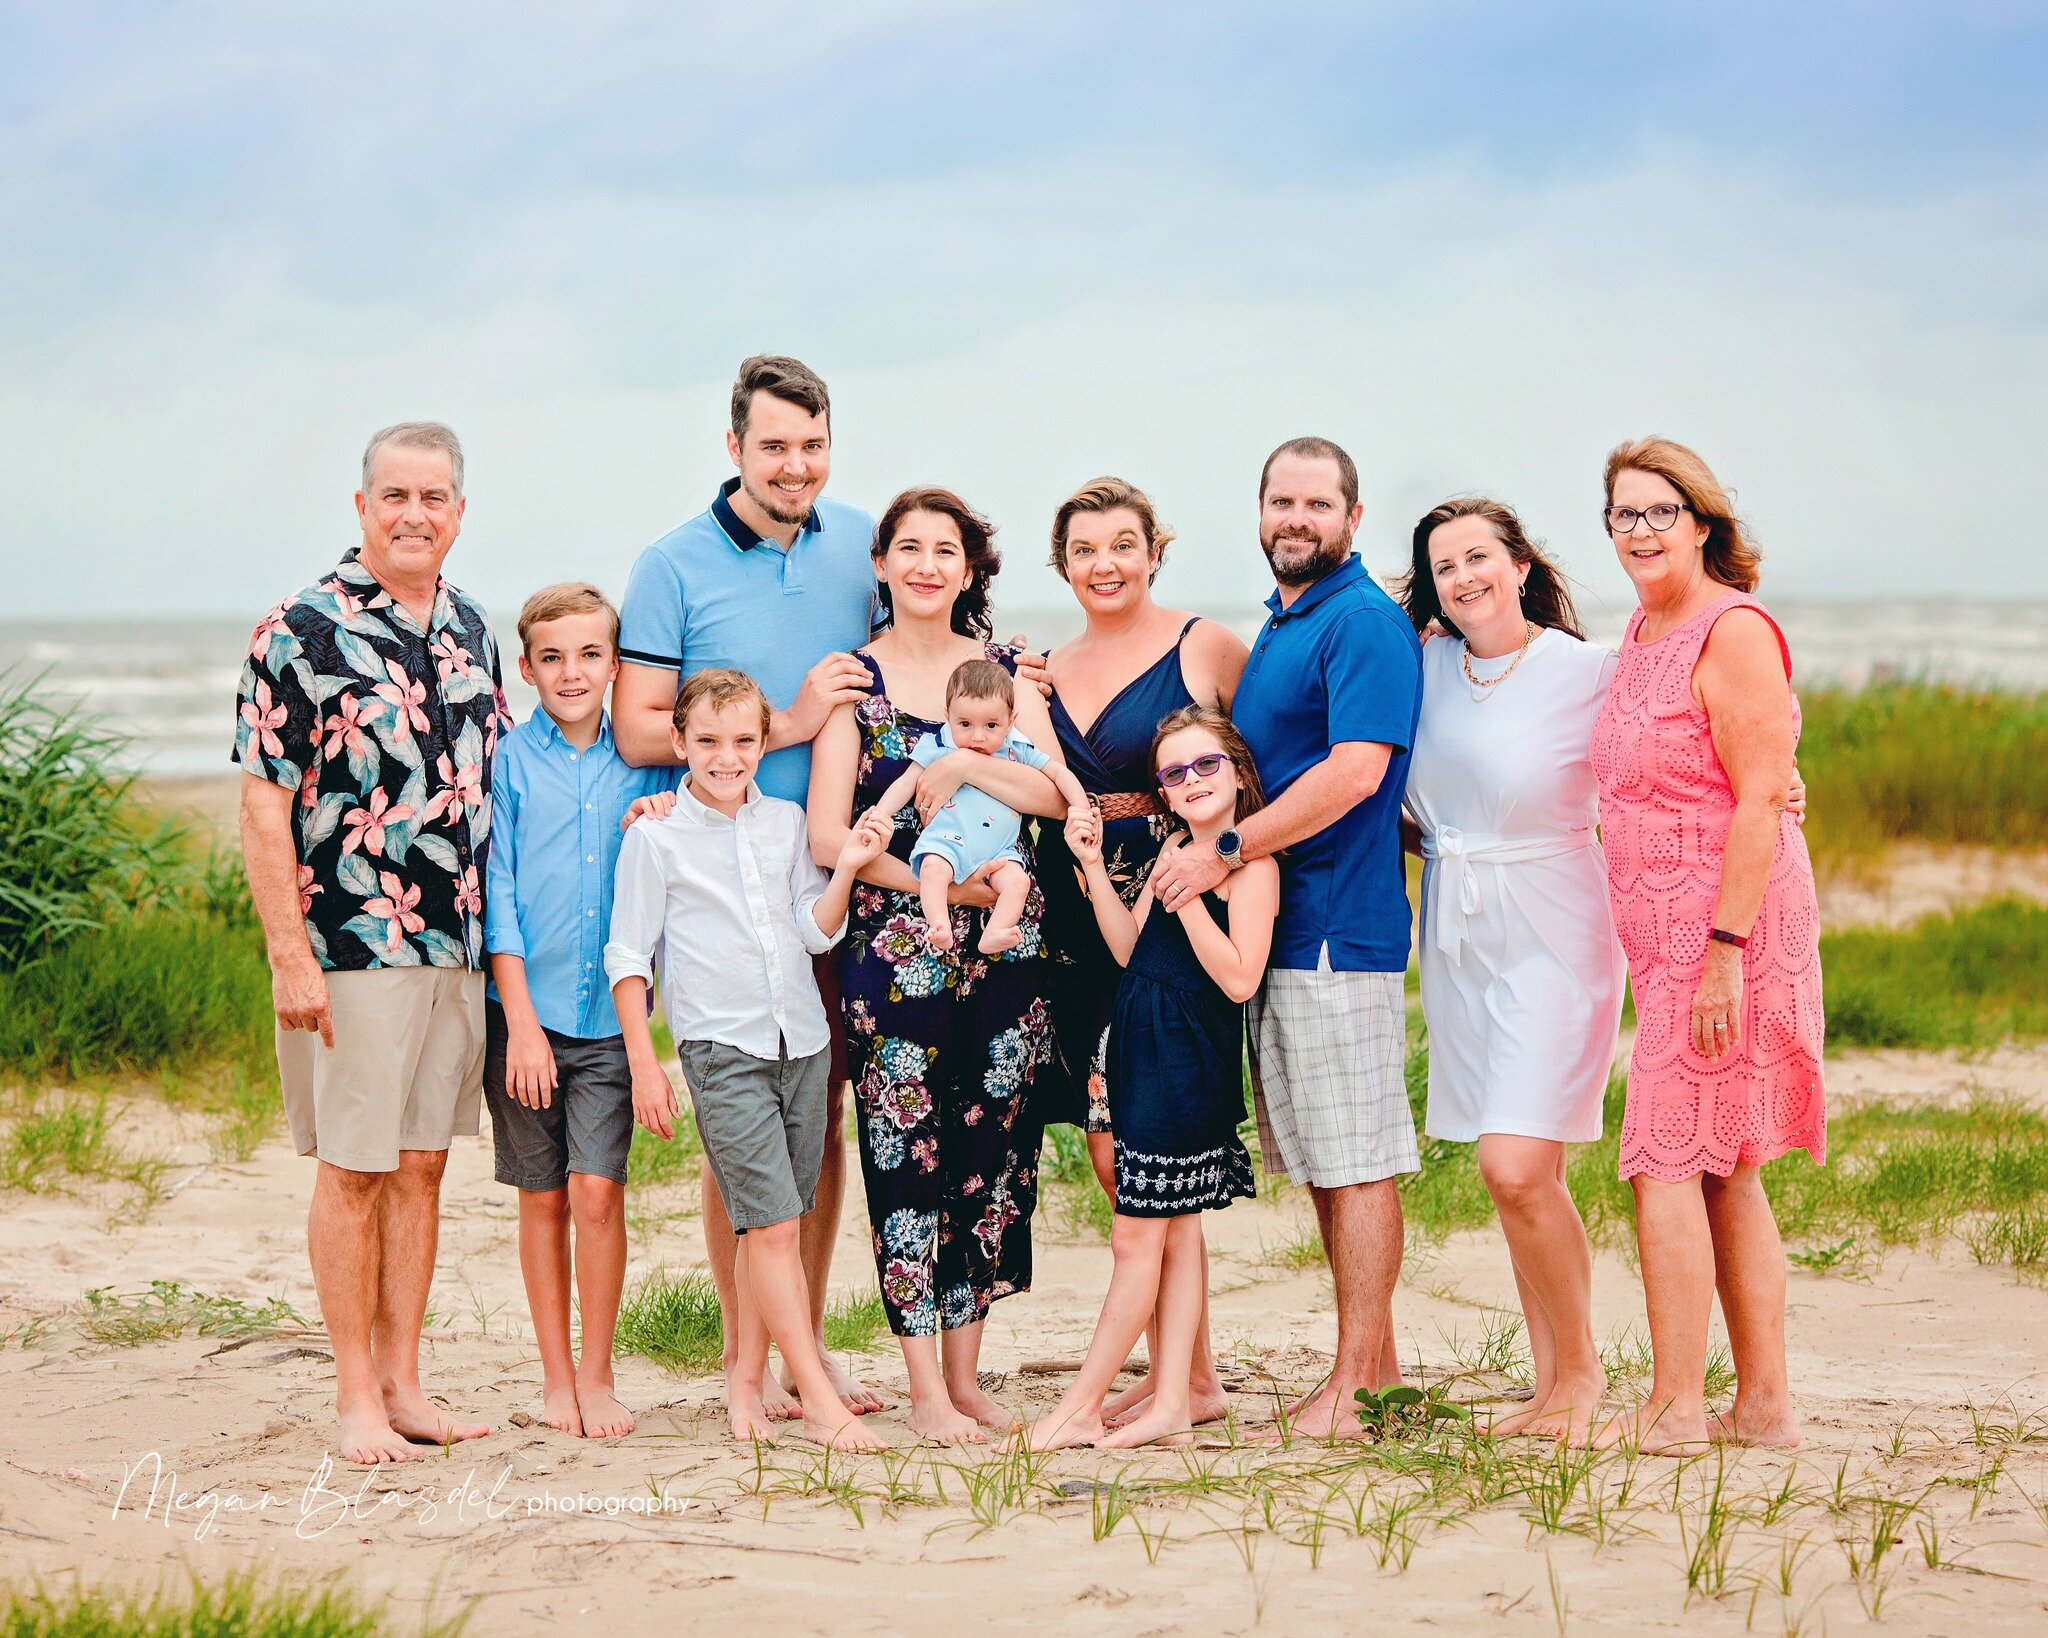 Spring and summer photos in Galveston are getting booked up quickly. Be sure to plan early if you are visiting the island or have family visiting! www.meganblasdelphotography.com